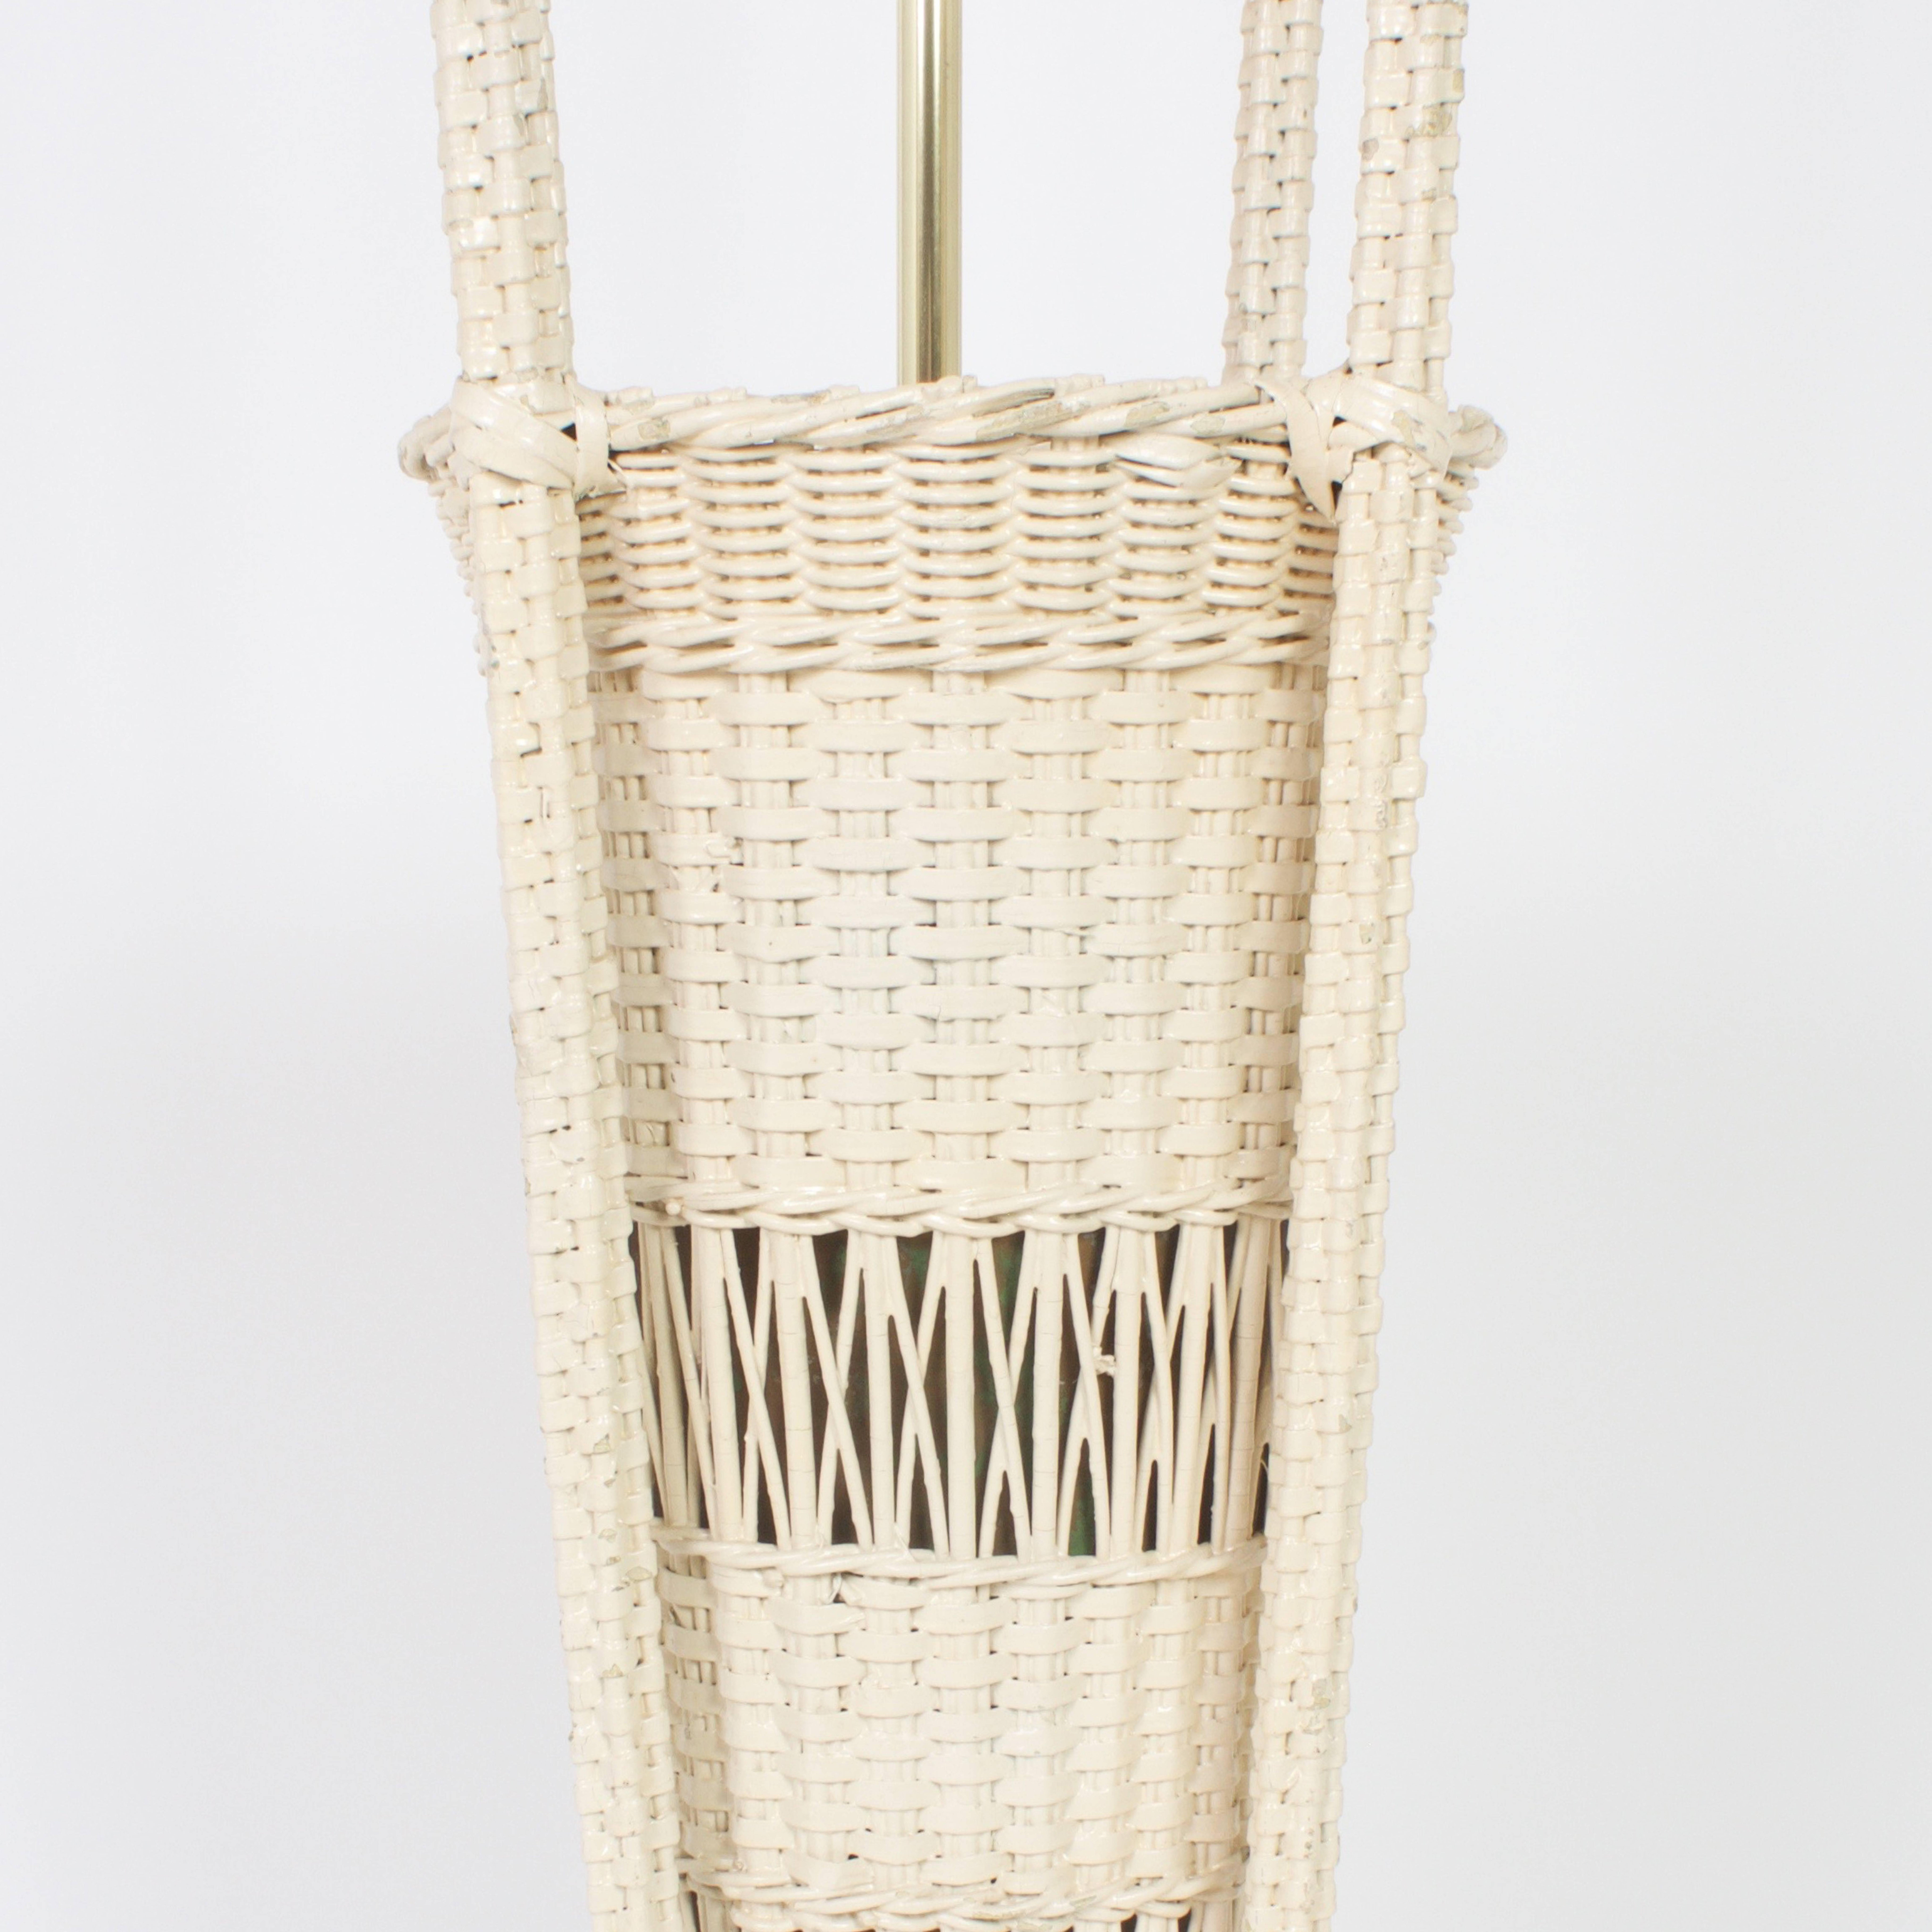 American Classic Antique Wicker Floor Lamp with a Unique Feature